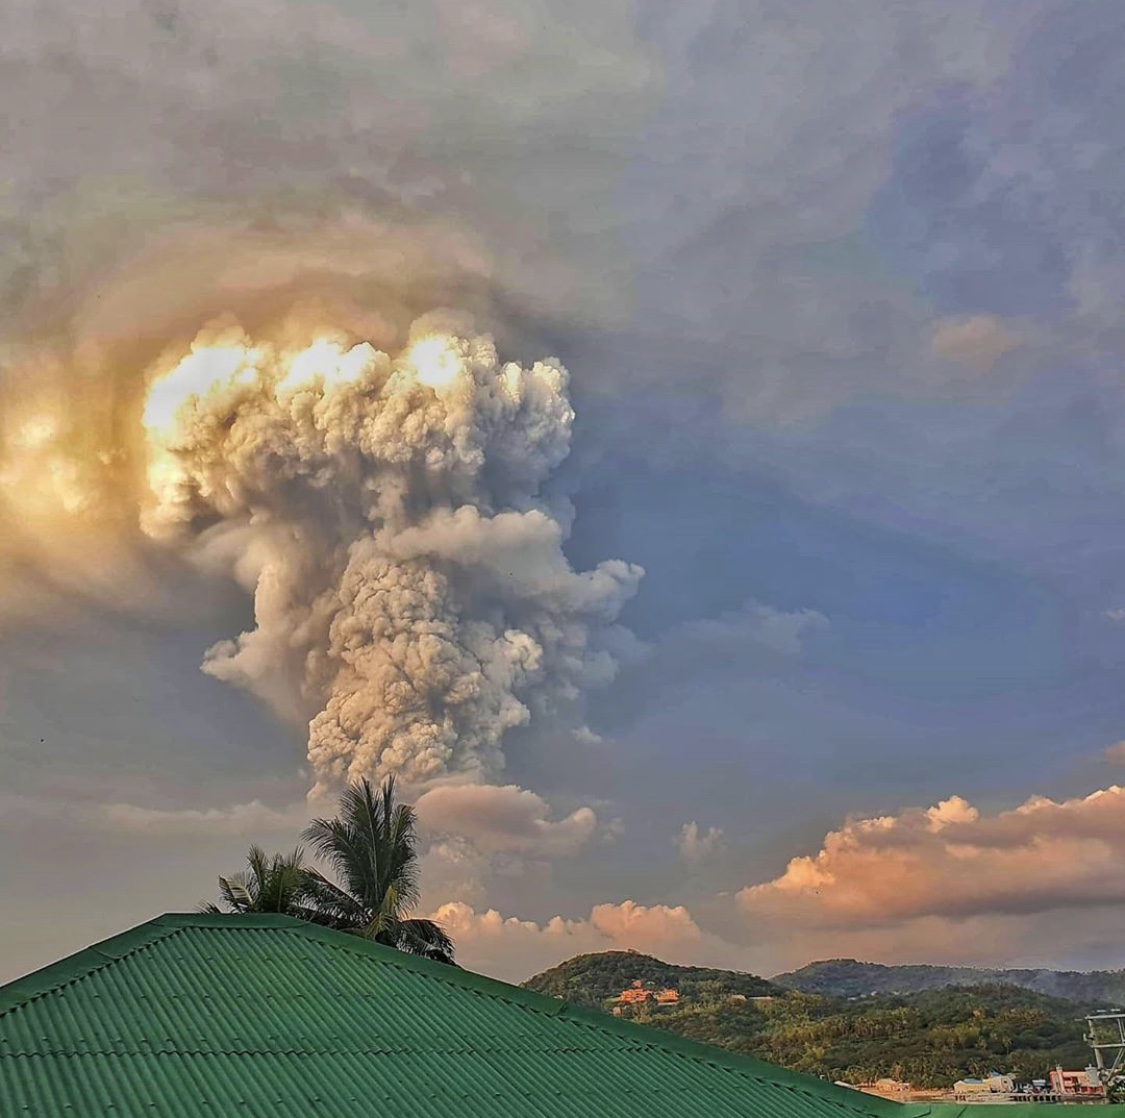 Rooftop view of a towering ash cloud colliding with the sky. This view of the recent Taal Volcano eruption in the Philippines was safely captured by IG contributor @nini_patience 📷🌋 #volcano #Philippines #TaalEruption